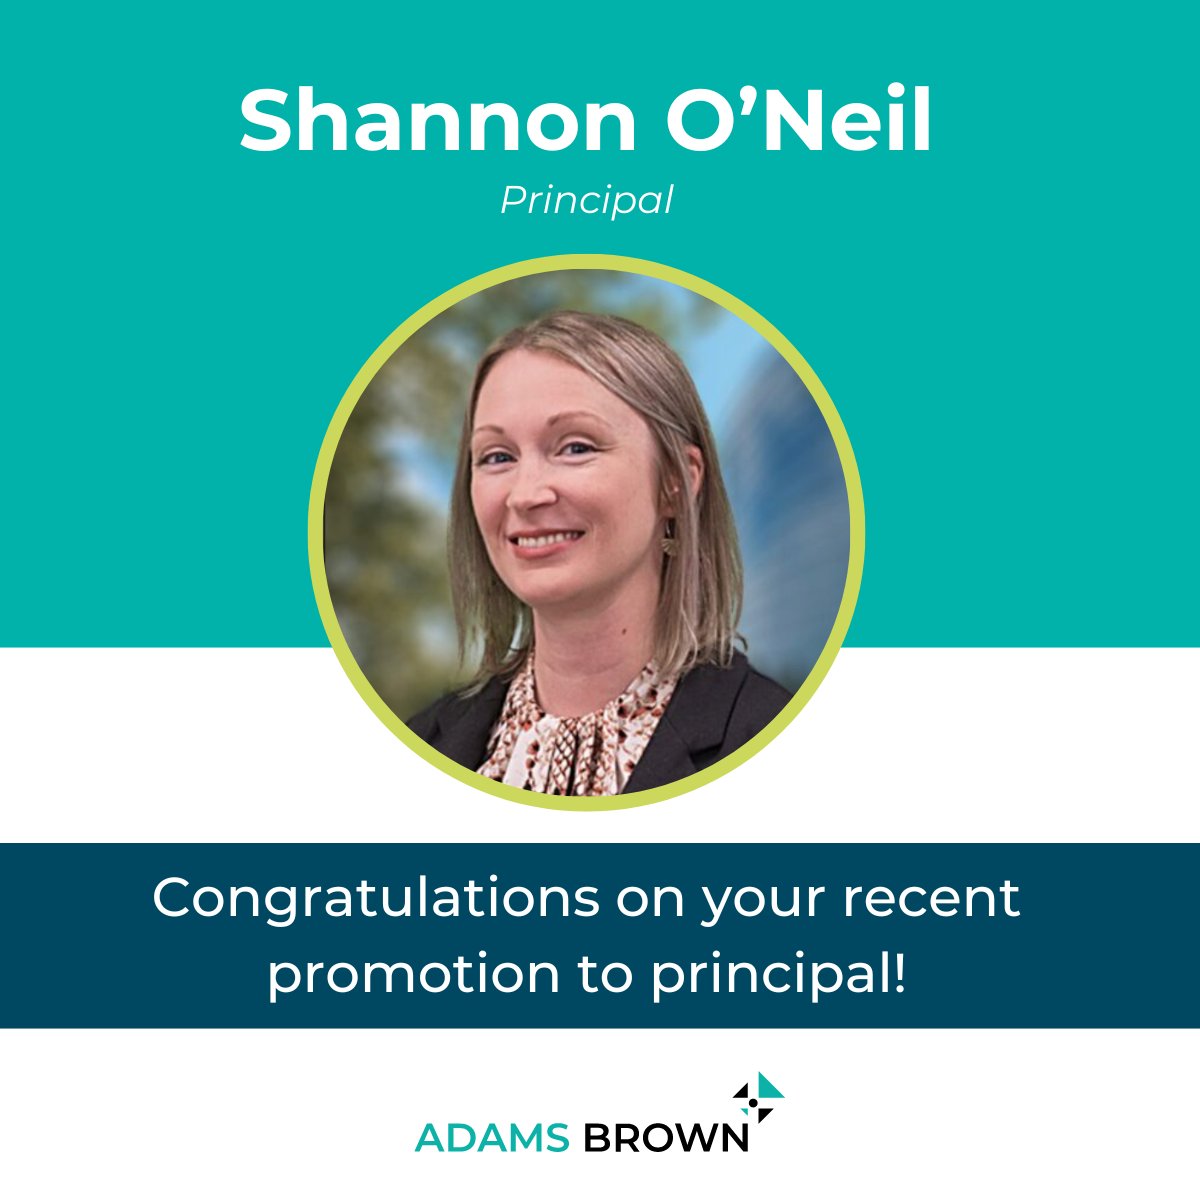 We have another promotion to recognize! Please join us in congratulating Shannon O'Neil, who was recently promoted to principal. >> hubs.ly/Q02vVZh50 #WorkWithAdamsBrown #compliance #promotion #KansasCPAs